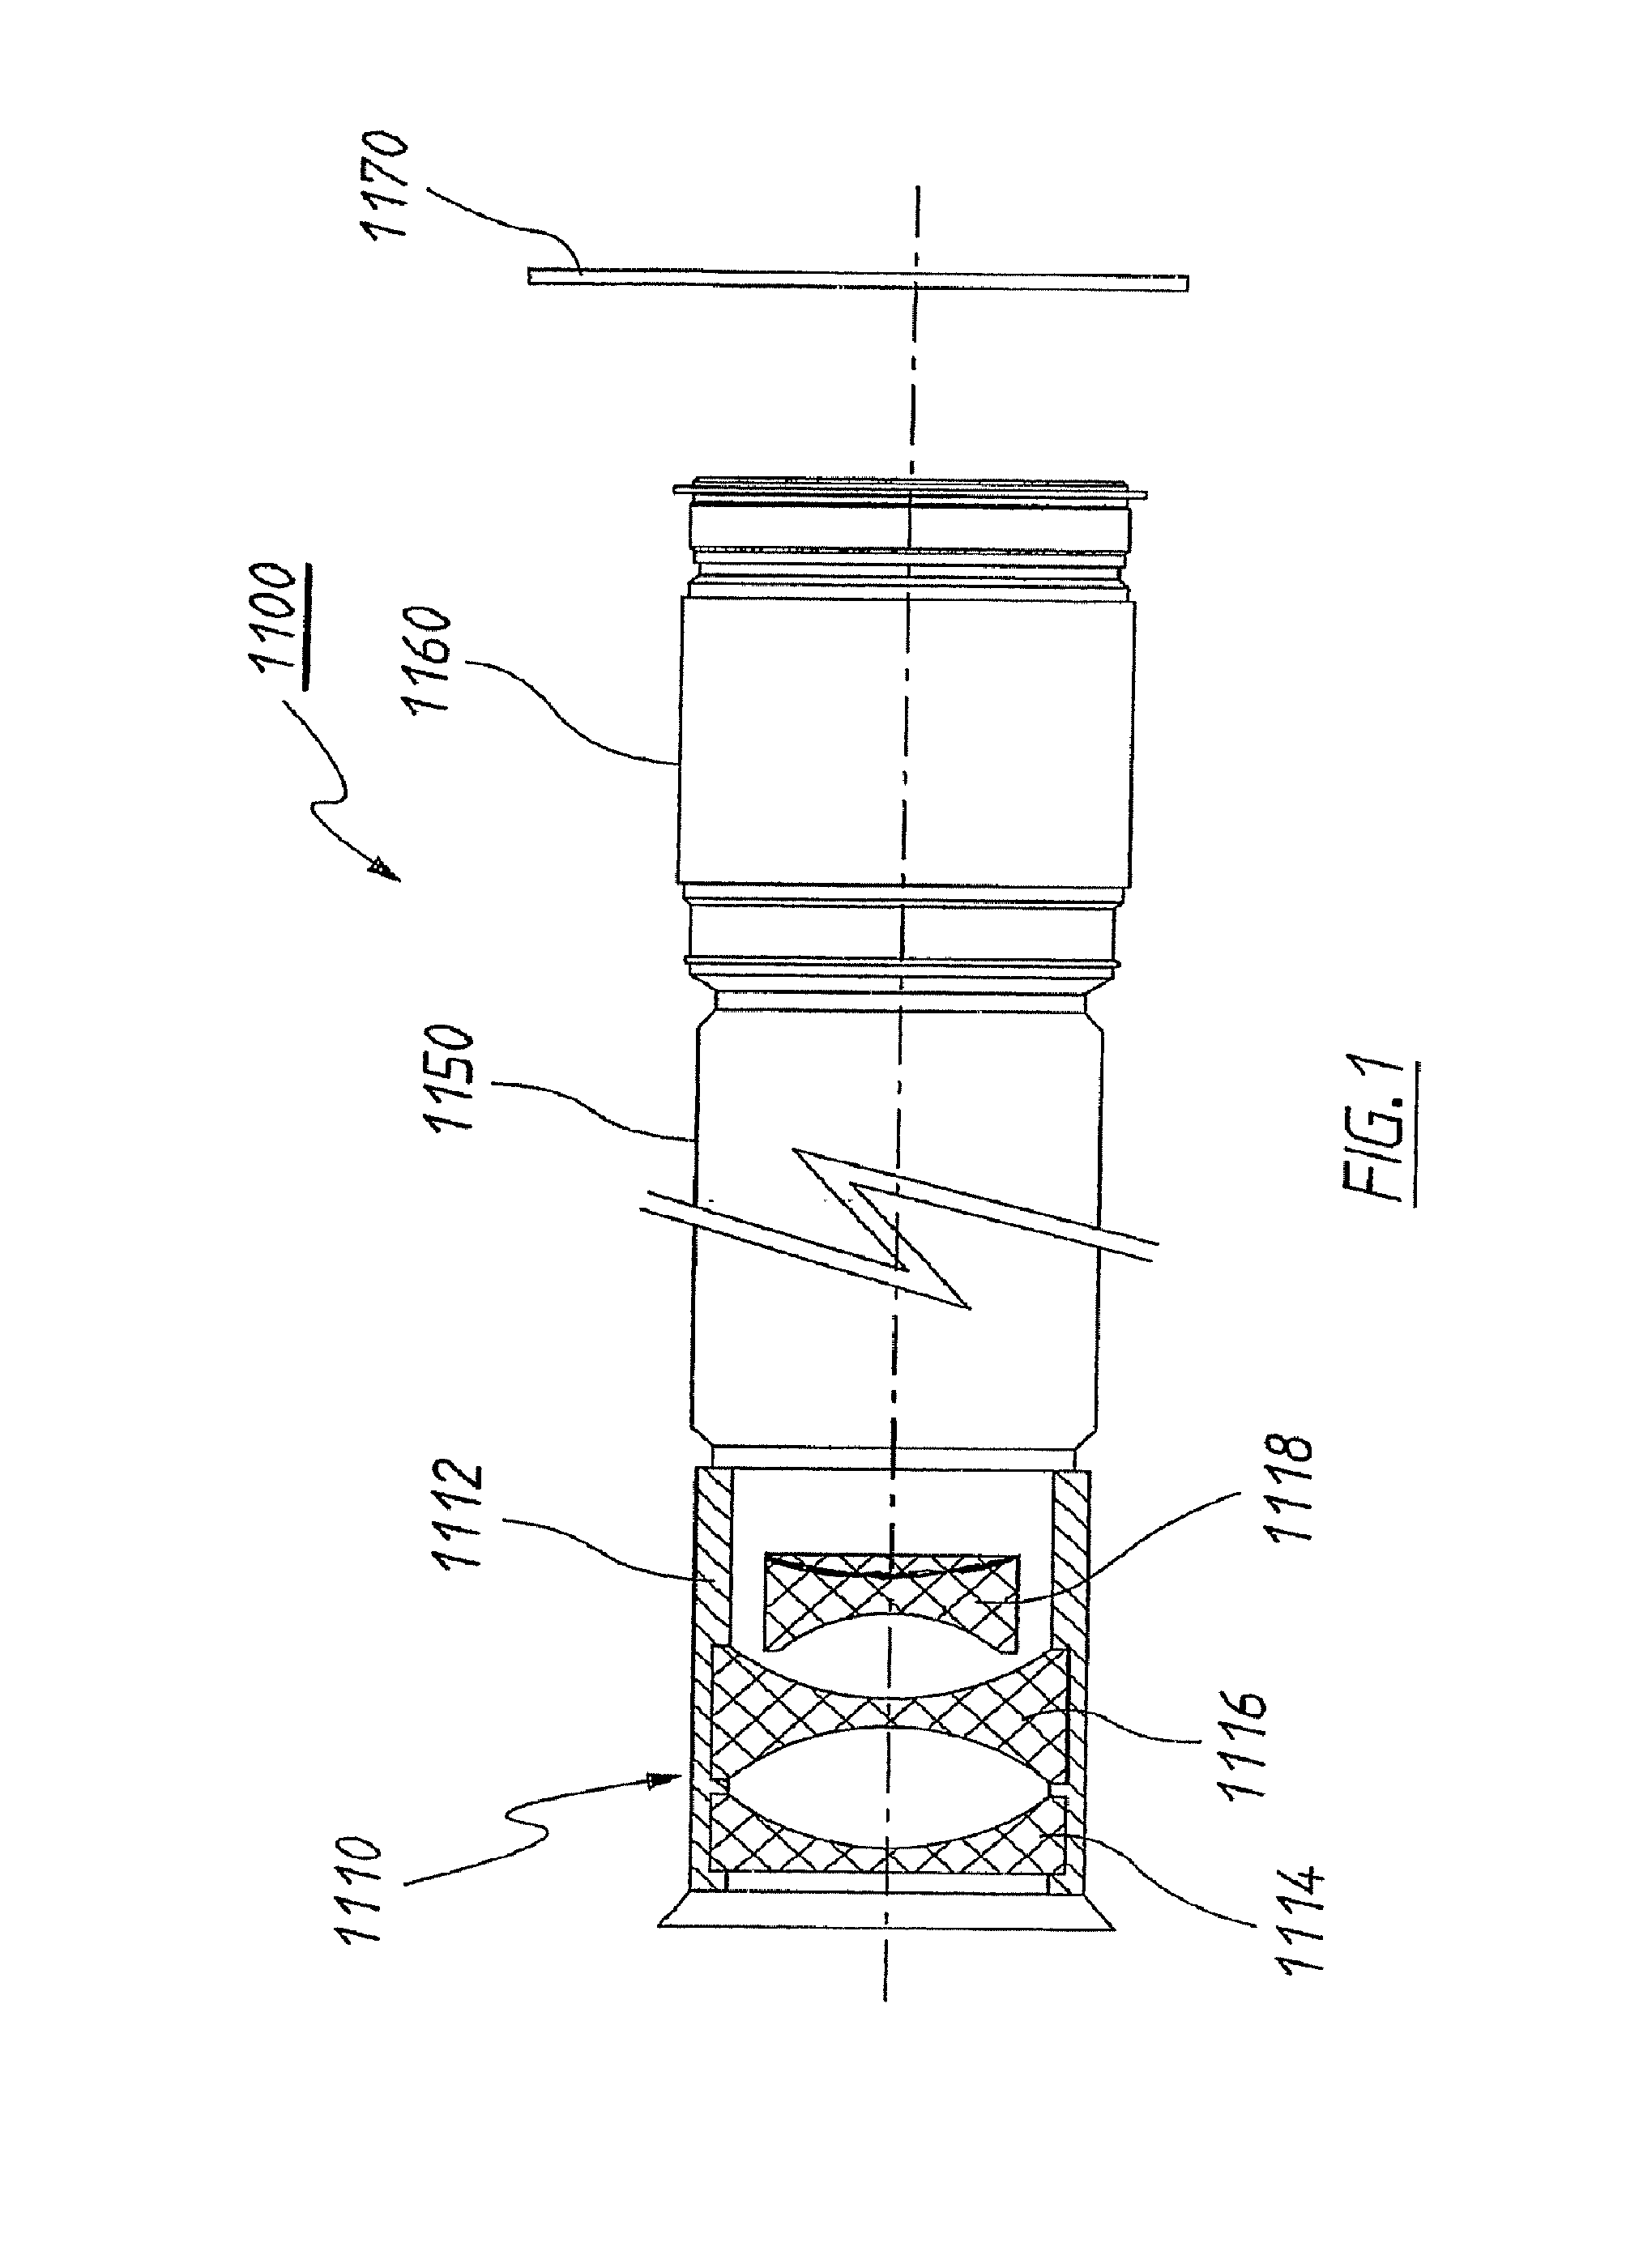 Optical lens systems